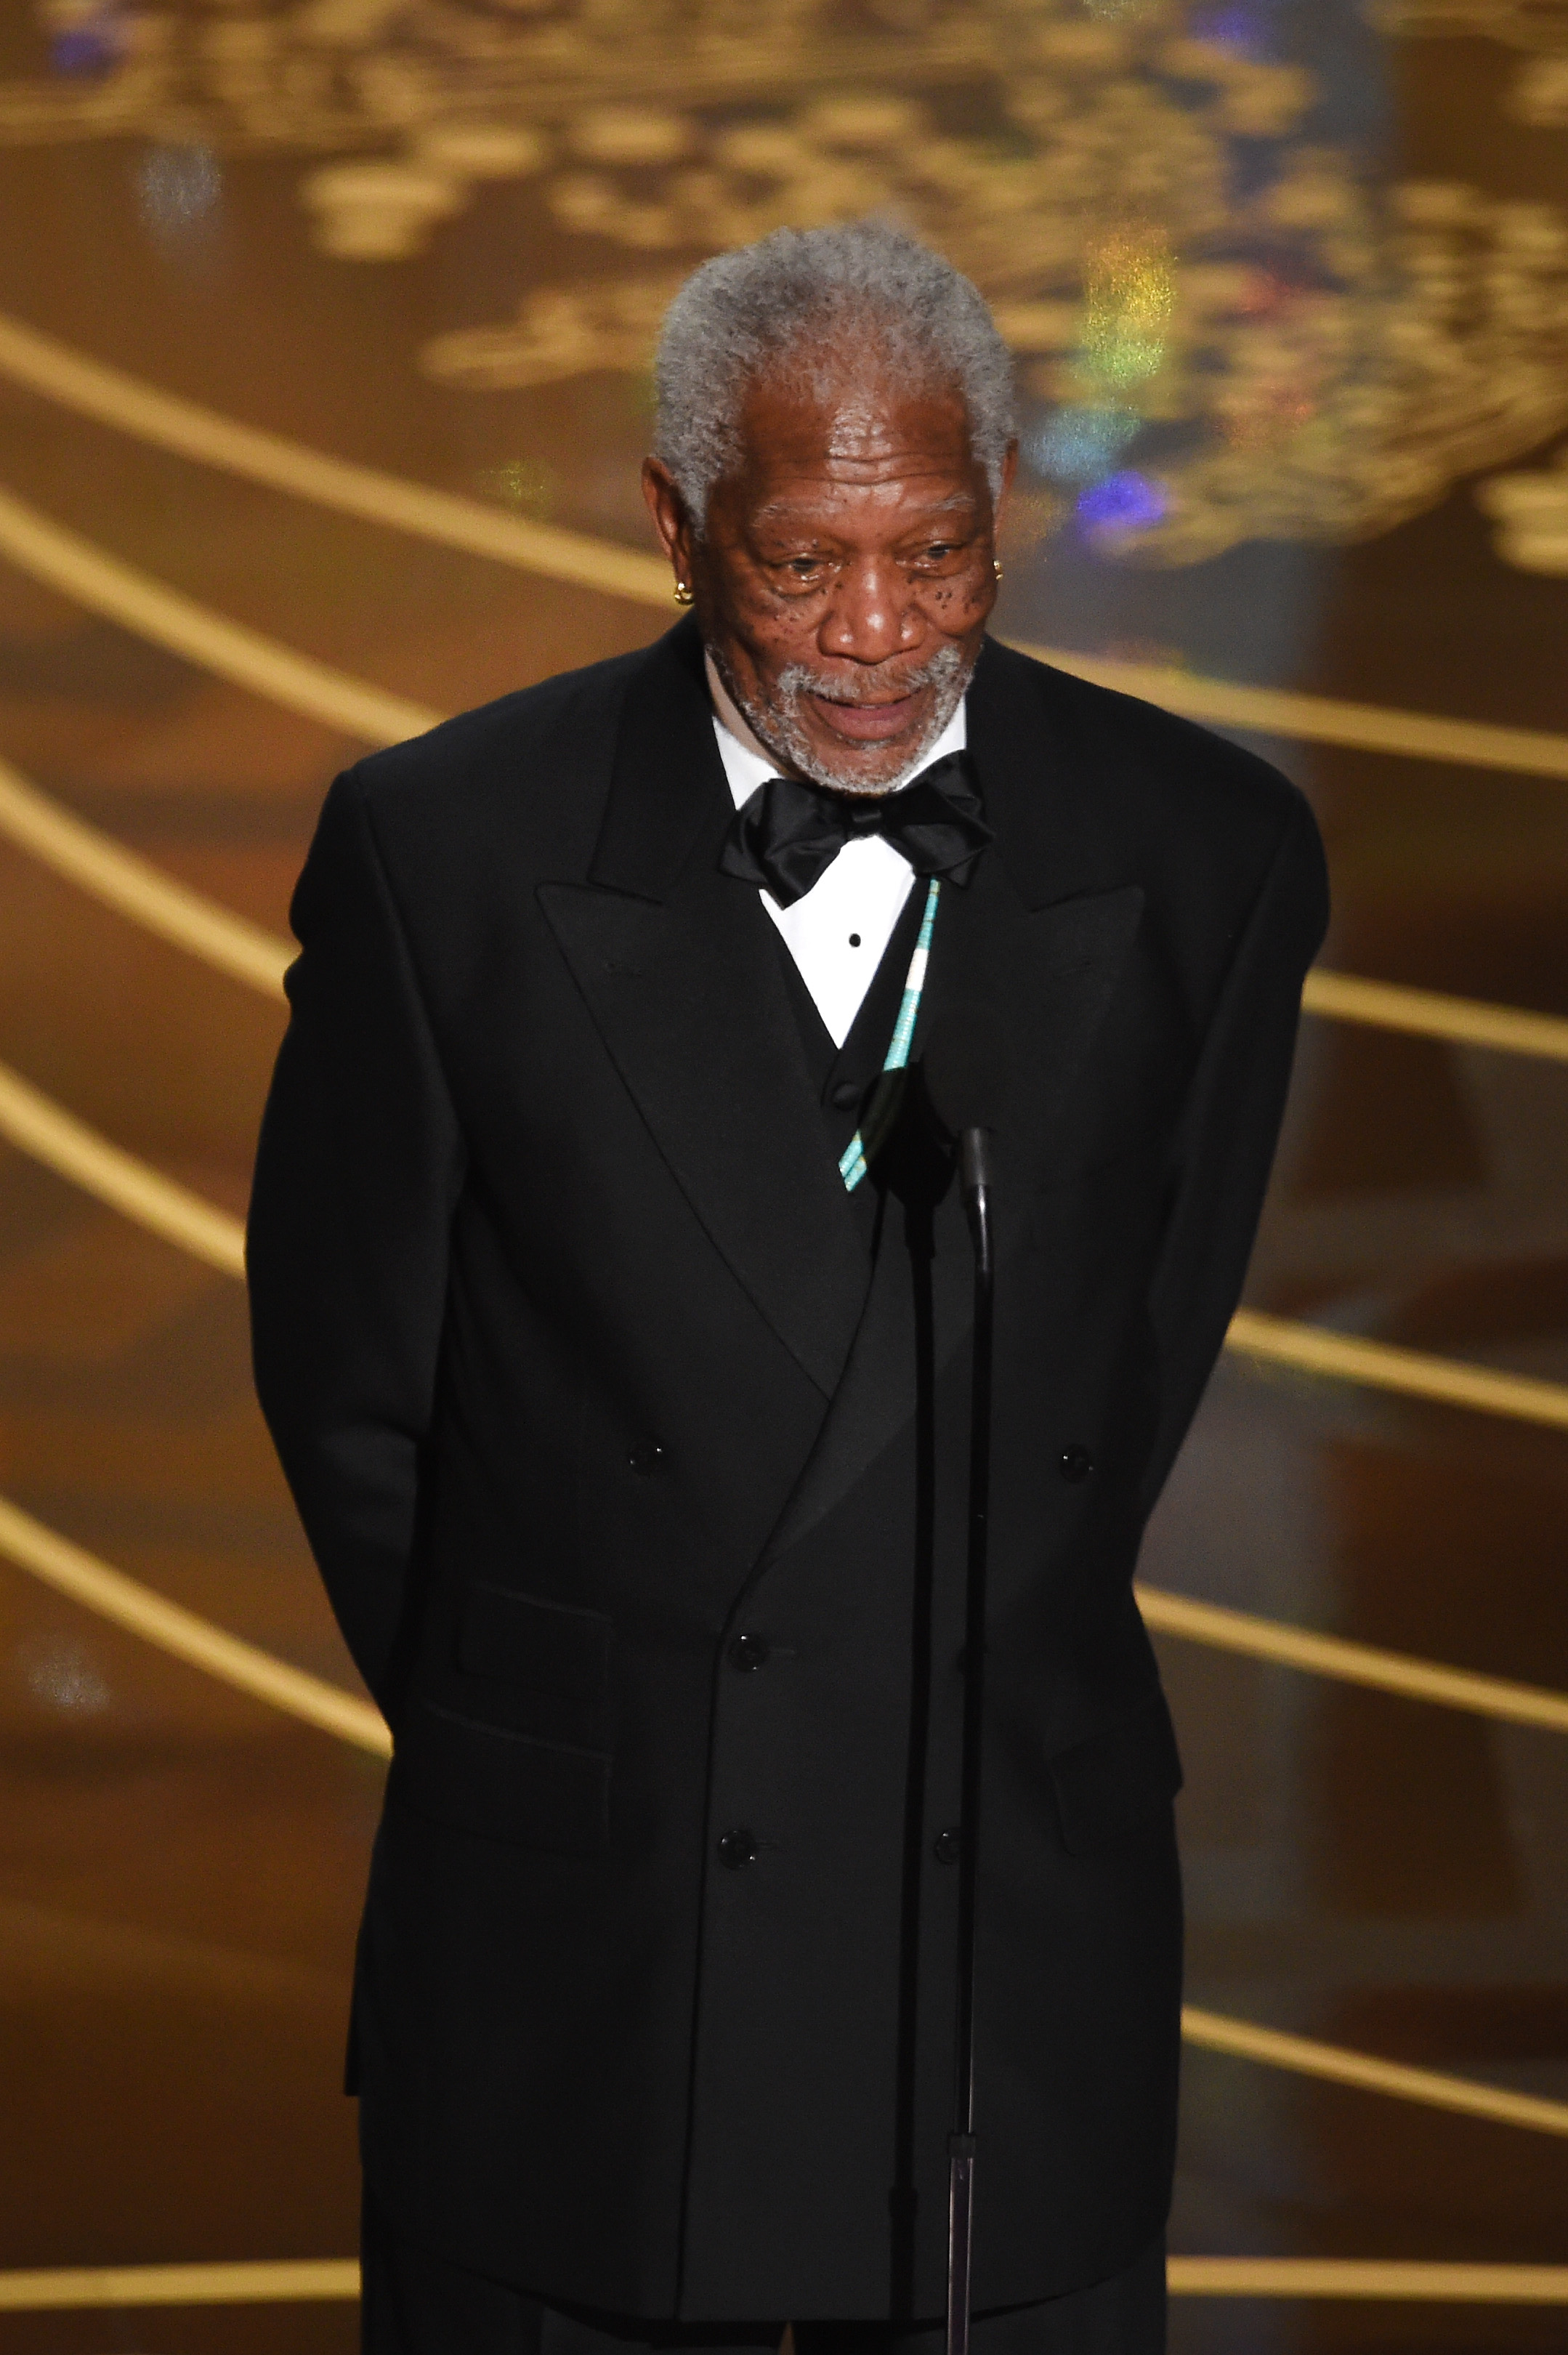 Morgan Freeman at the 88th Annual Academy Awards in Hollywood, California on February 28, 2016 | Source: Getty Images